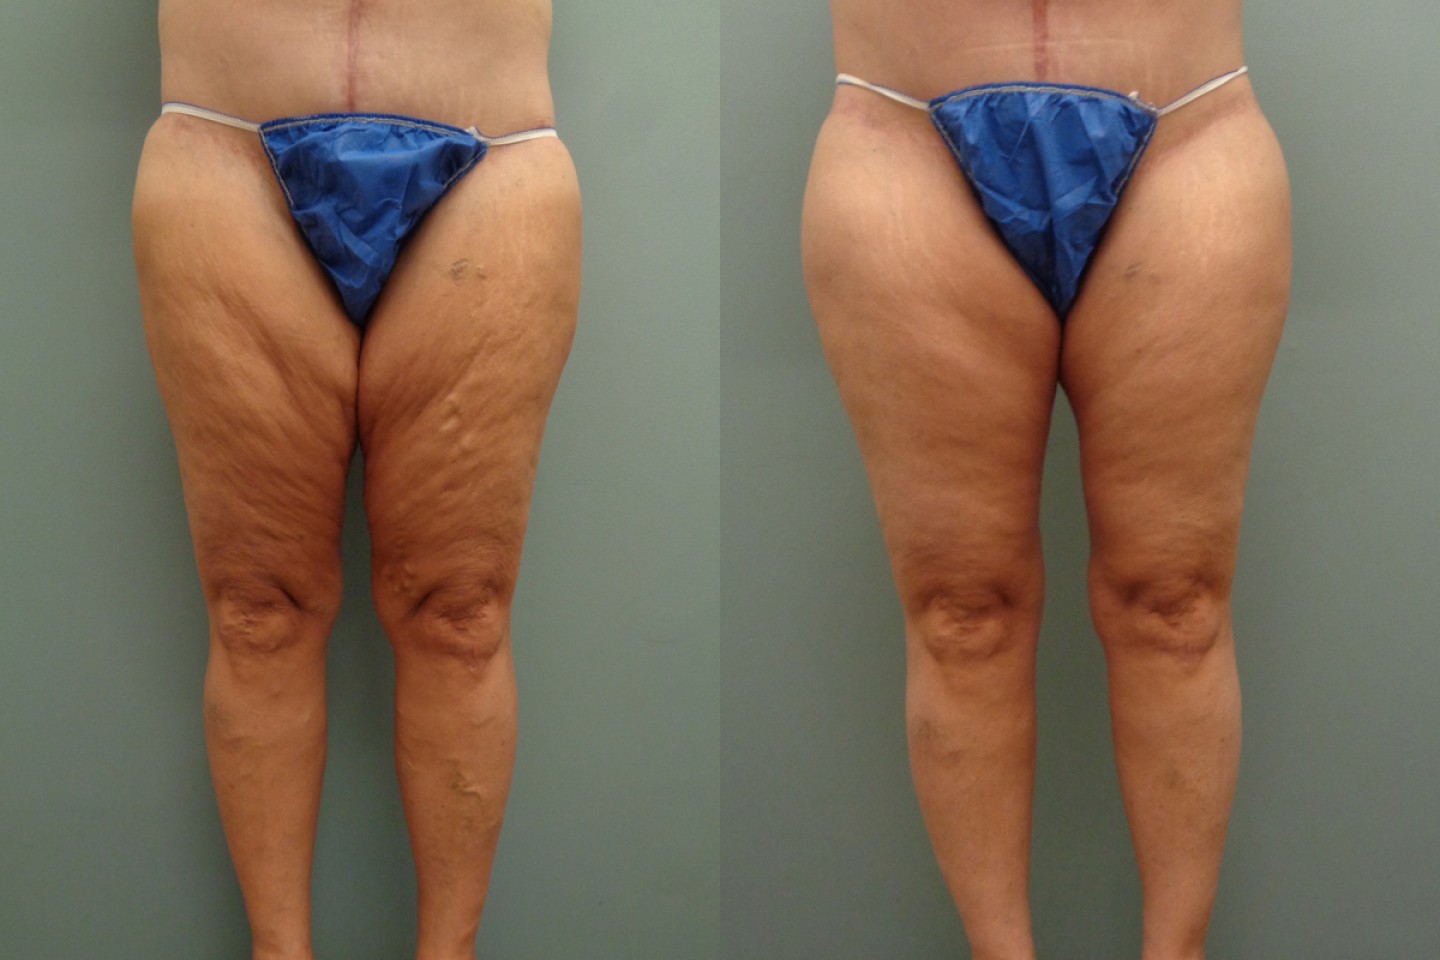 Thigh Lift Before & After Pictures Nashville, Franklin, TN